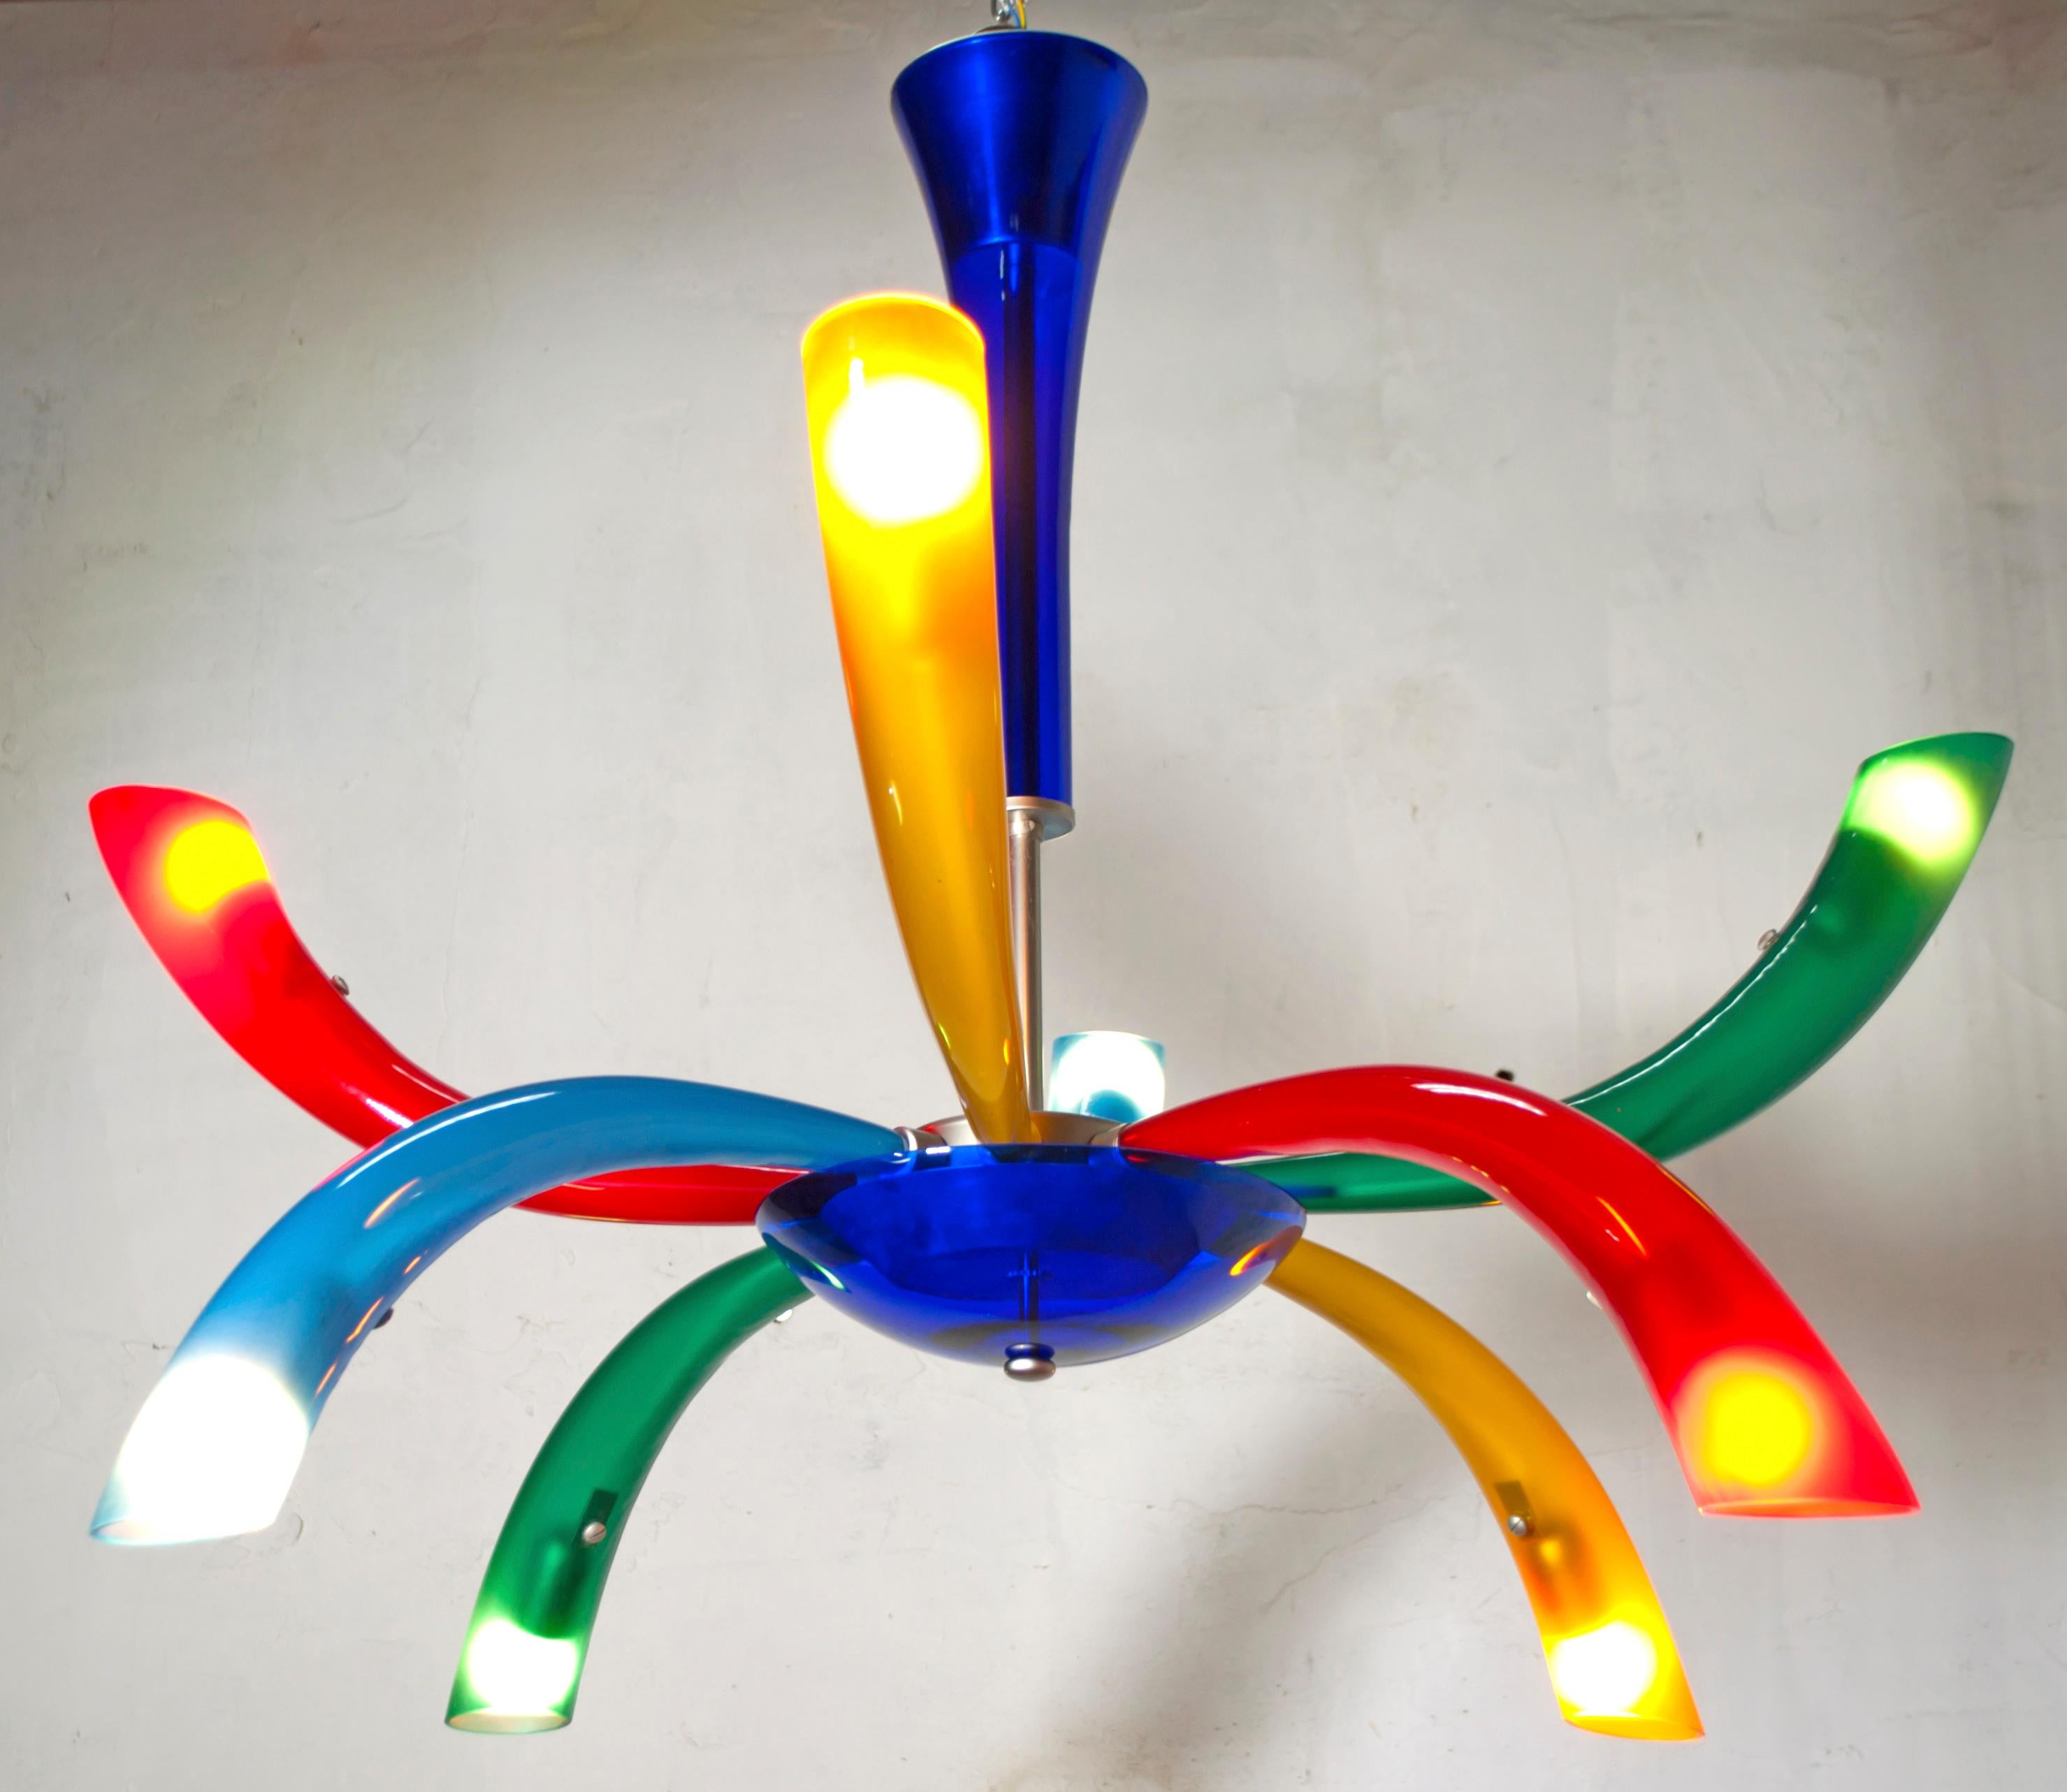 Fireworks is a Murano blown glass chandelier by Barovier and Toso. The arms can adjust all positions up or down, Italy, 1990s.

Barovier artistic glassware has existed since the mid-thirteenth century and is therefore the sixth oldest family